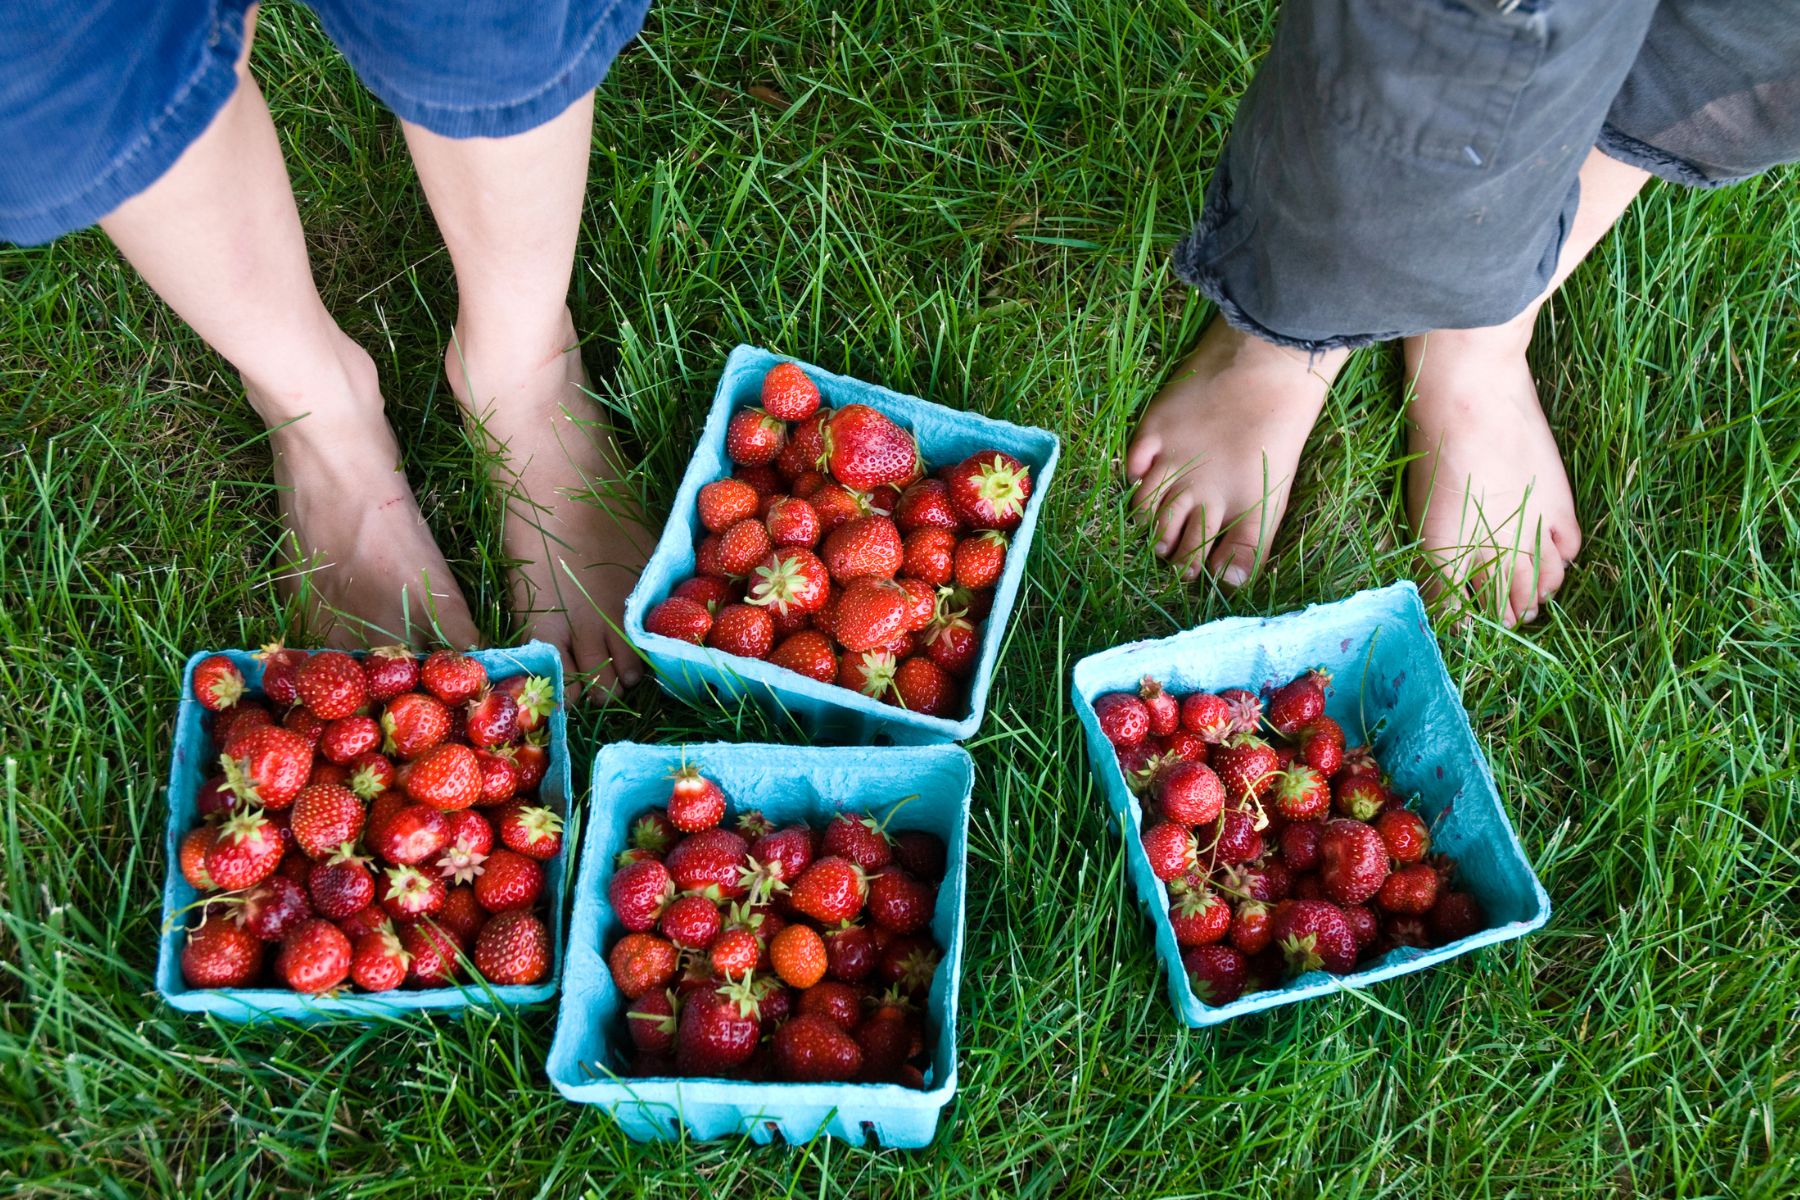 When is the Best Time To Go Strawberry Picking in South Carolina?